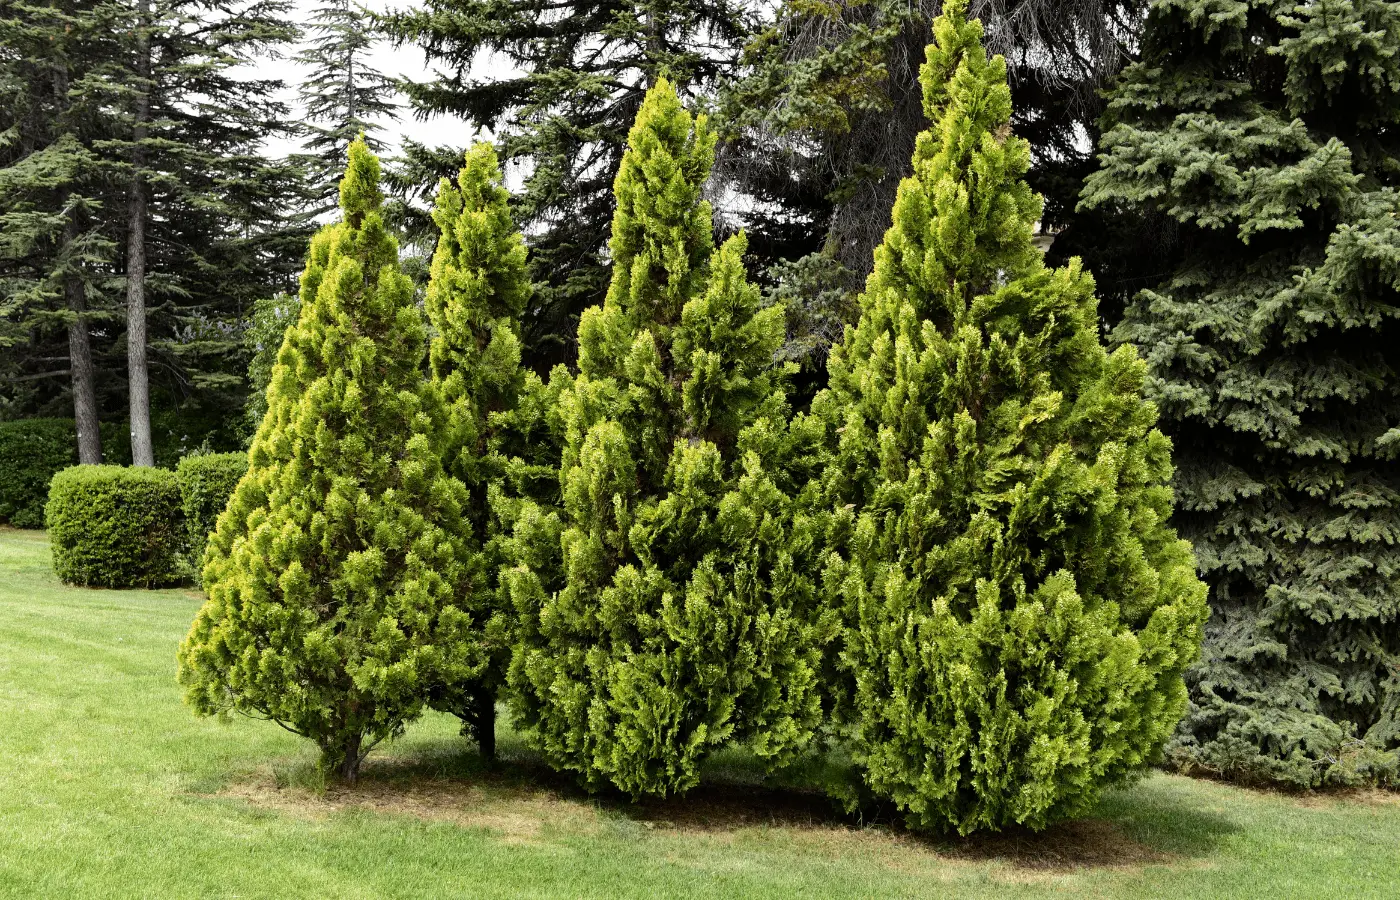 can Arborvitae be used for firewood